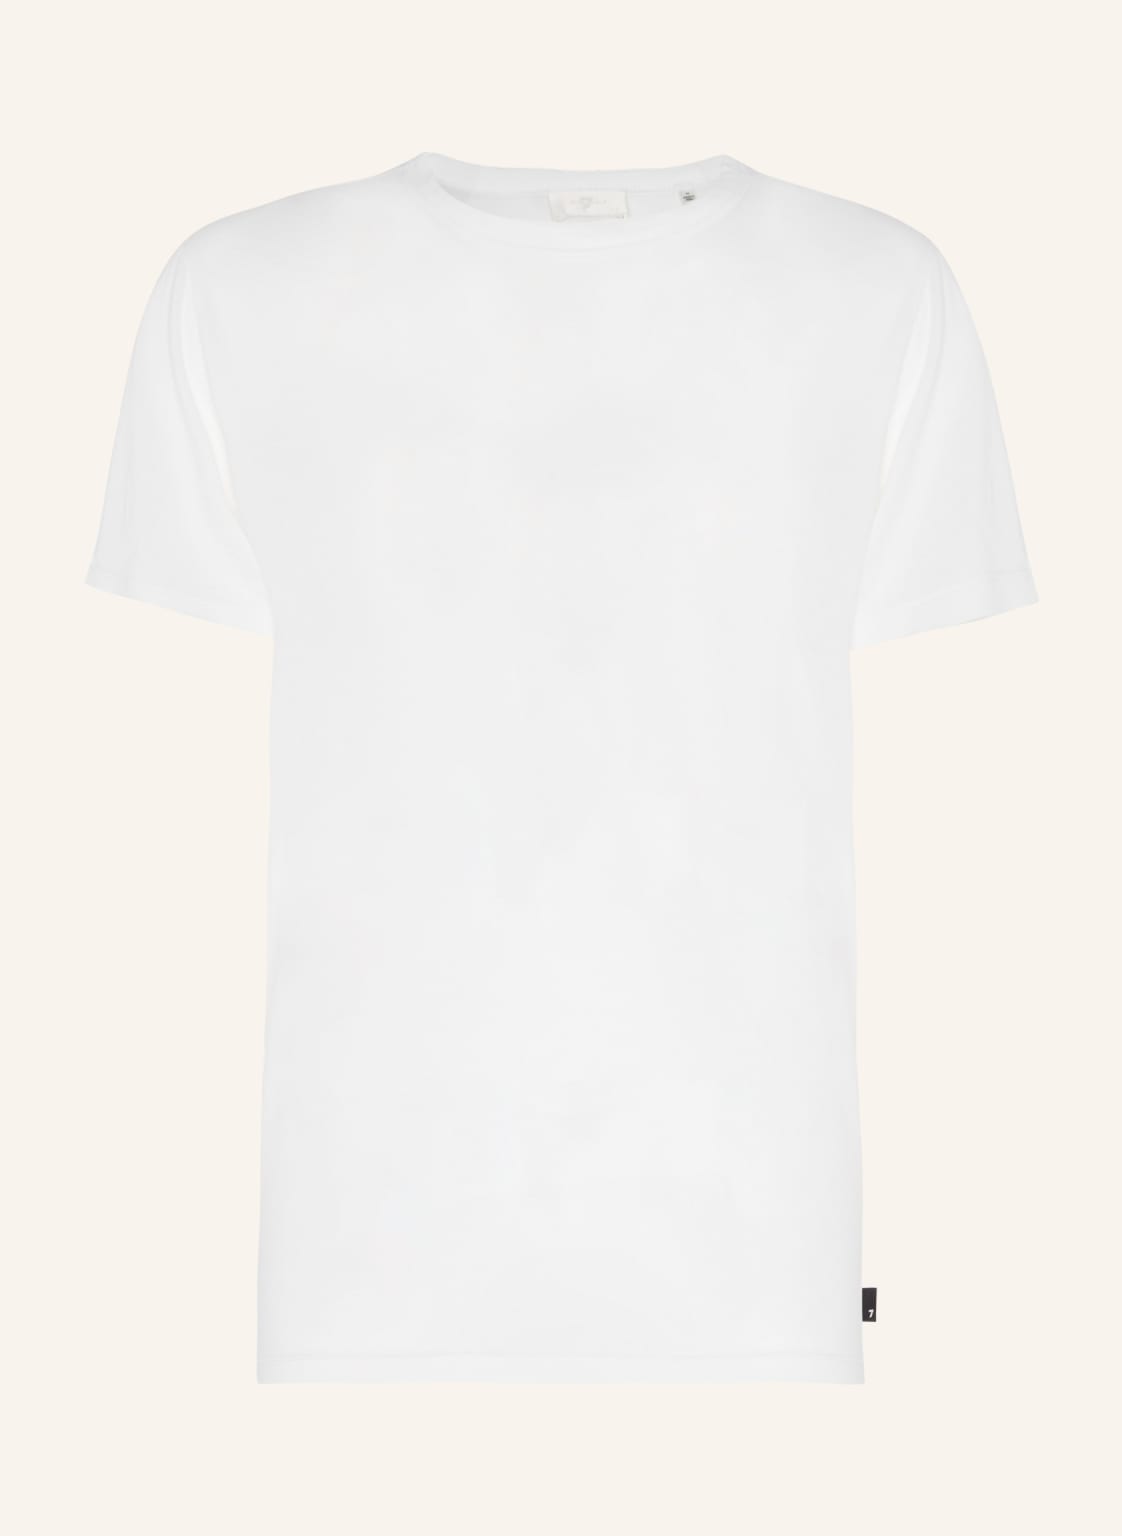 7 For All Mankind Featherweight T-Shirt weiss von 7 For All Mankind